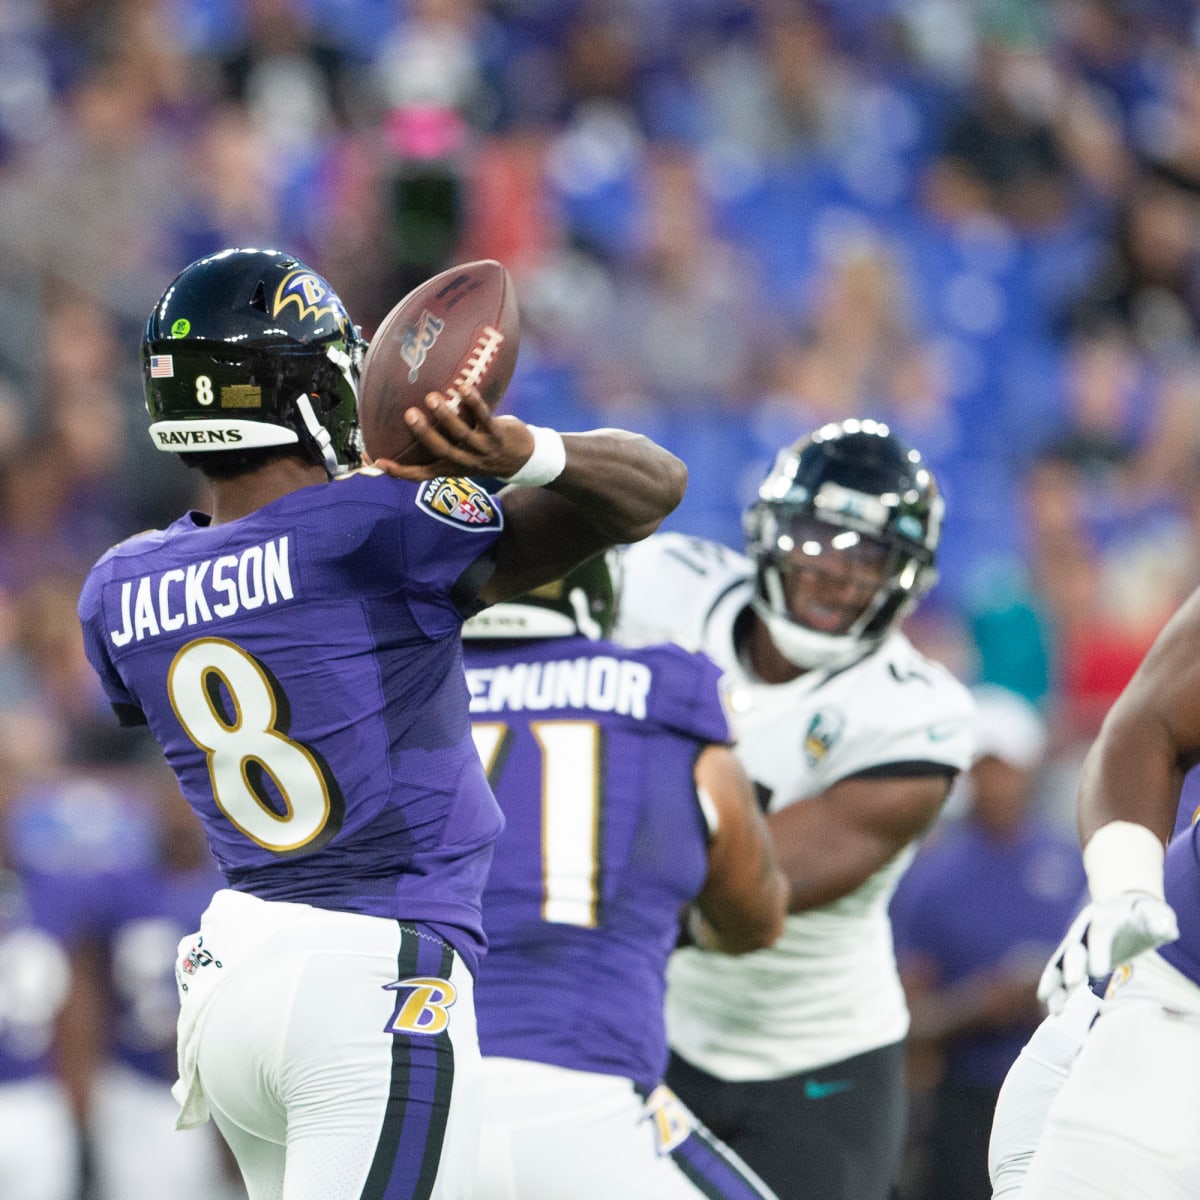 Jackson's availability unclear as Ravens prep for playoffs - CBS